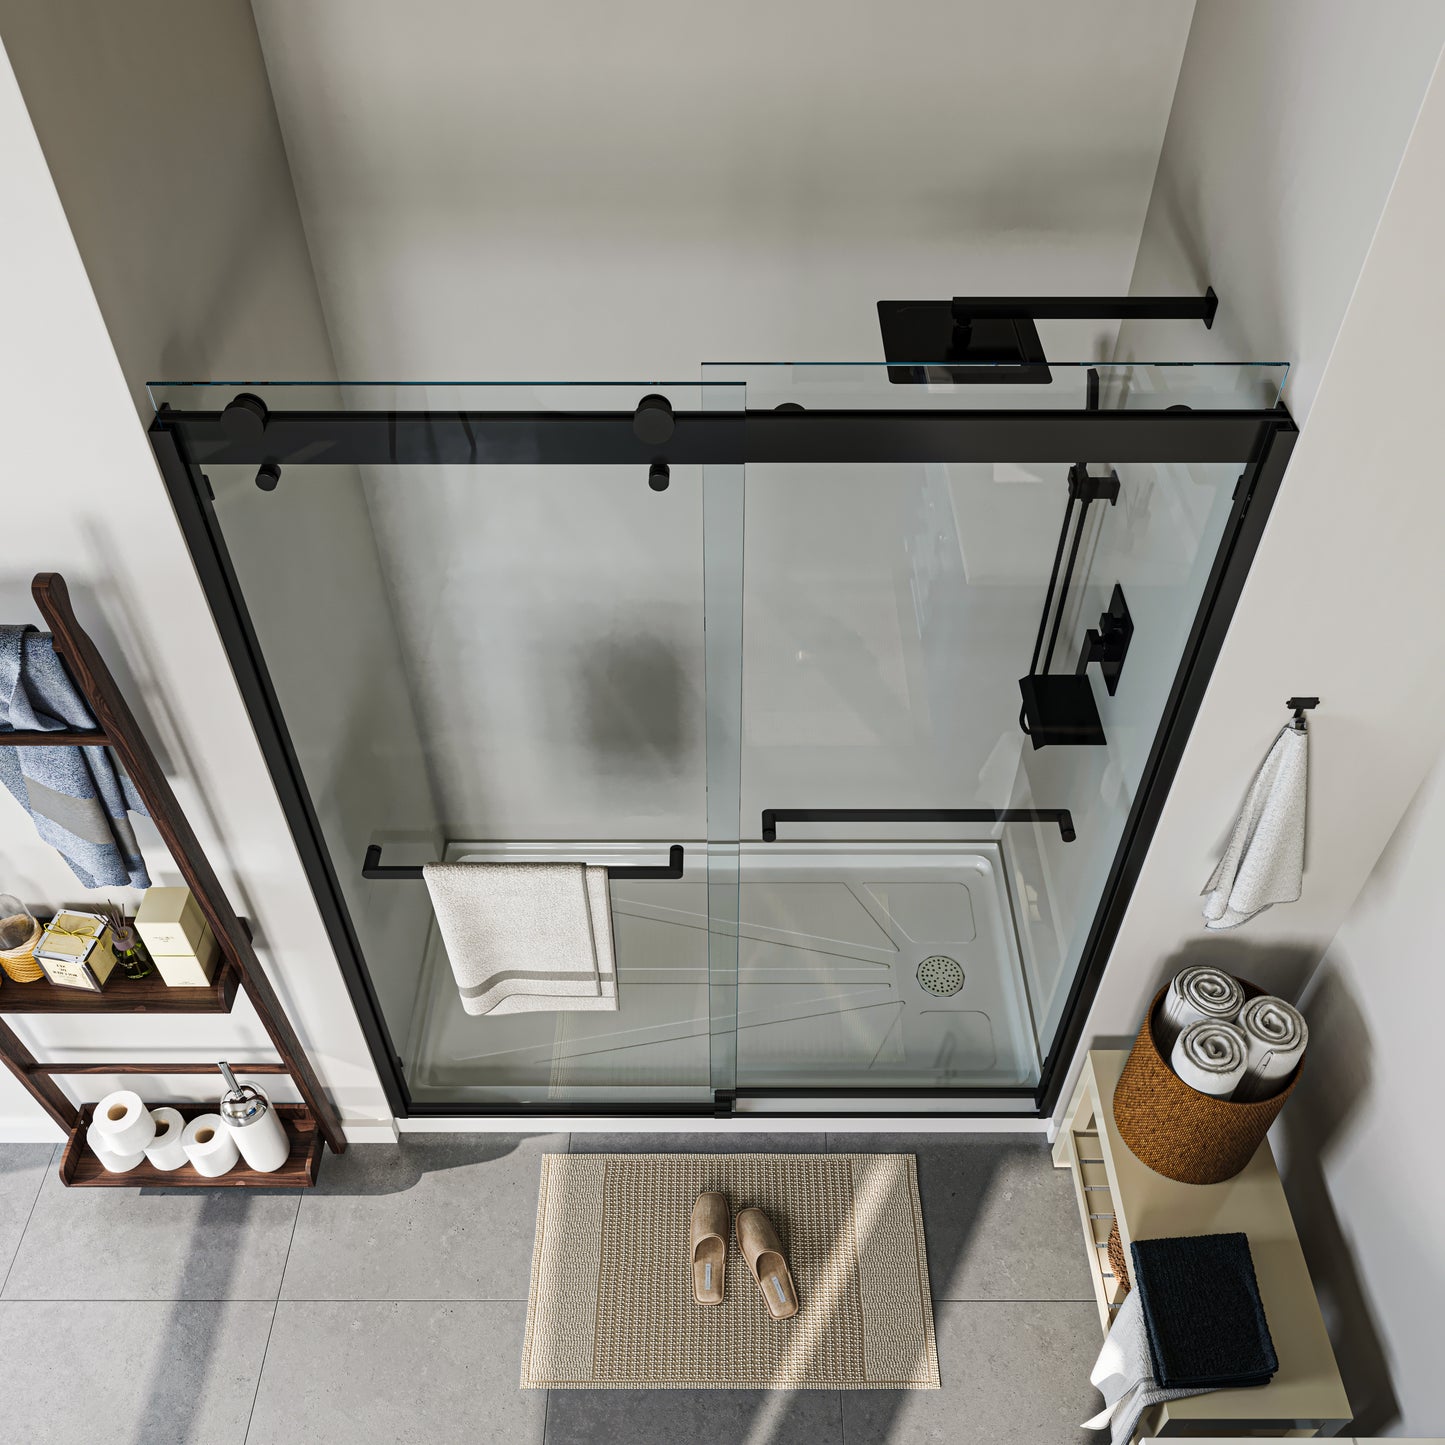 60 in. W x 76 in. H Double Sliding Aluminum Alloy Frame Shower Door in Matte black with Stainless Steel Handle